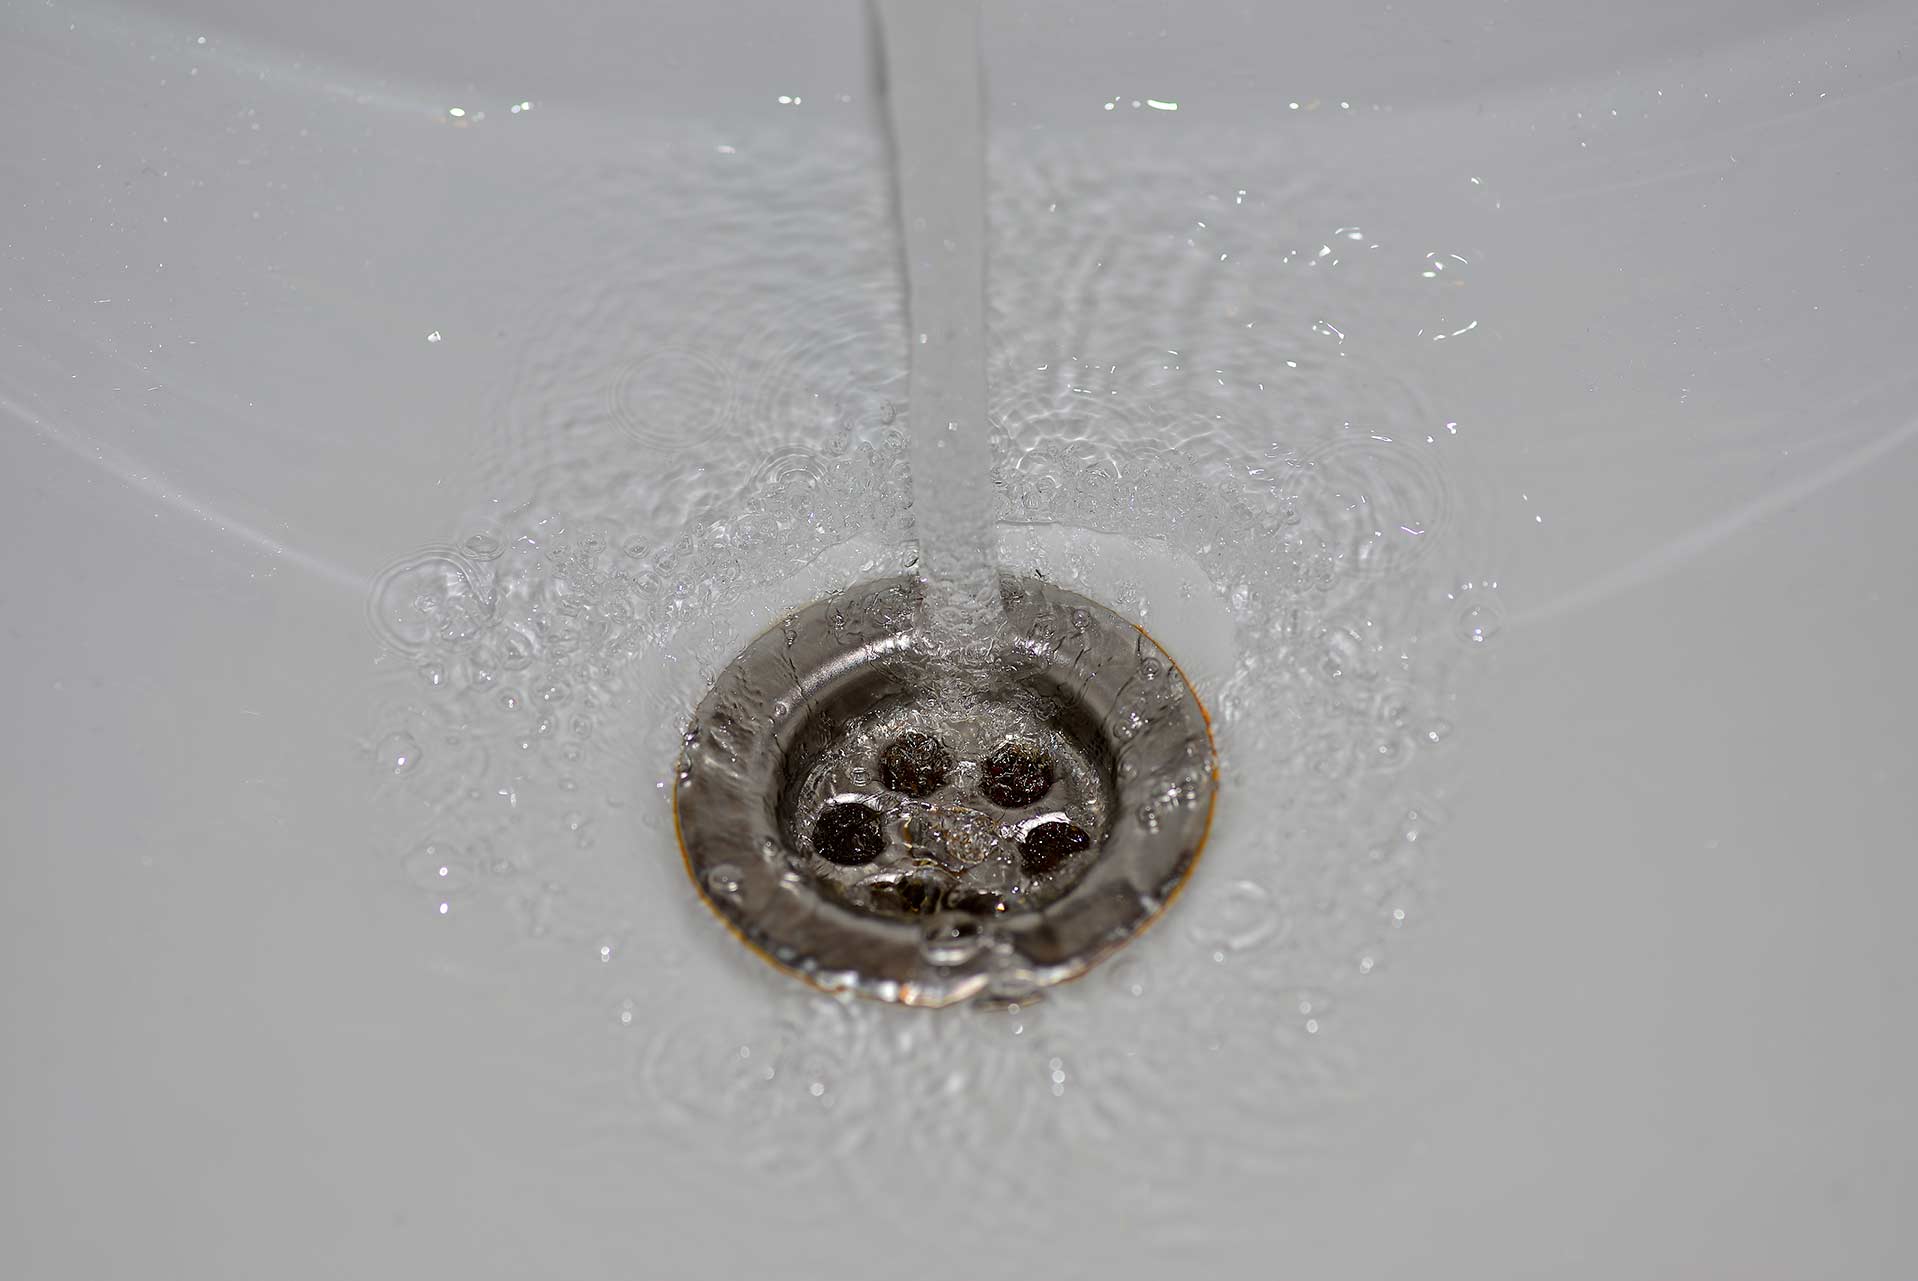 A2B Drains provides services to unblock blocked sinks and drains for properties in Kensington.